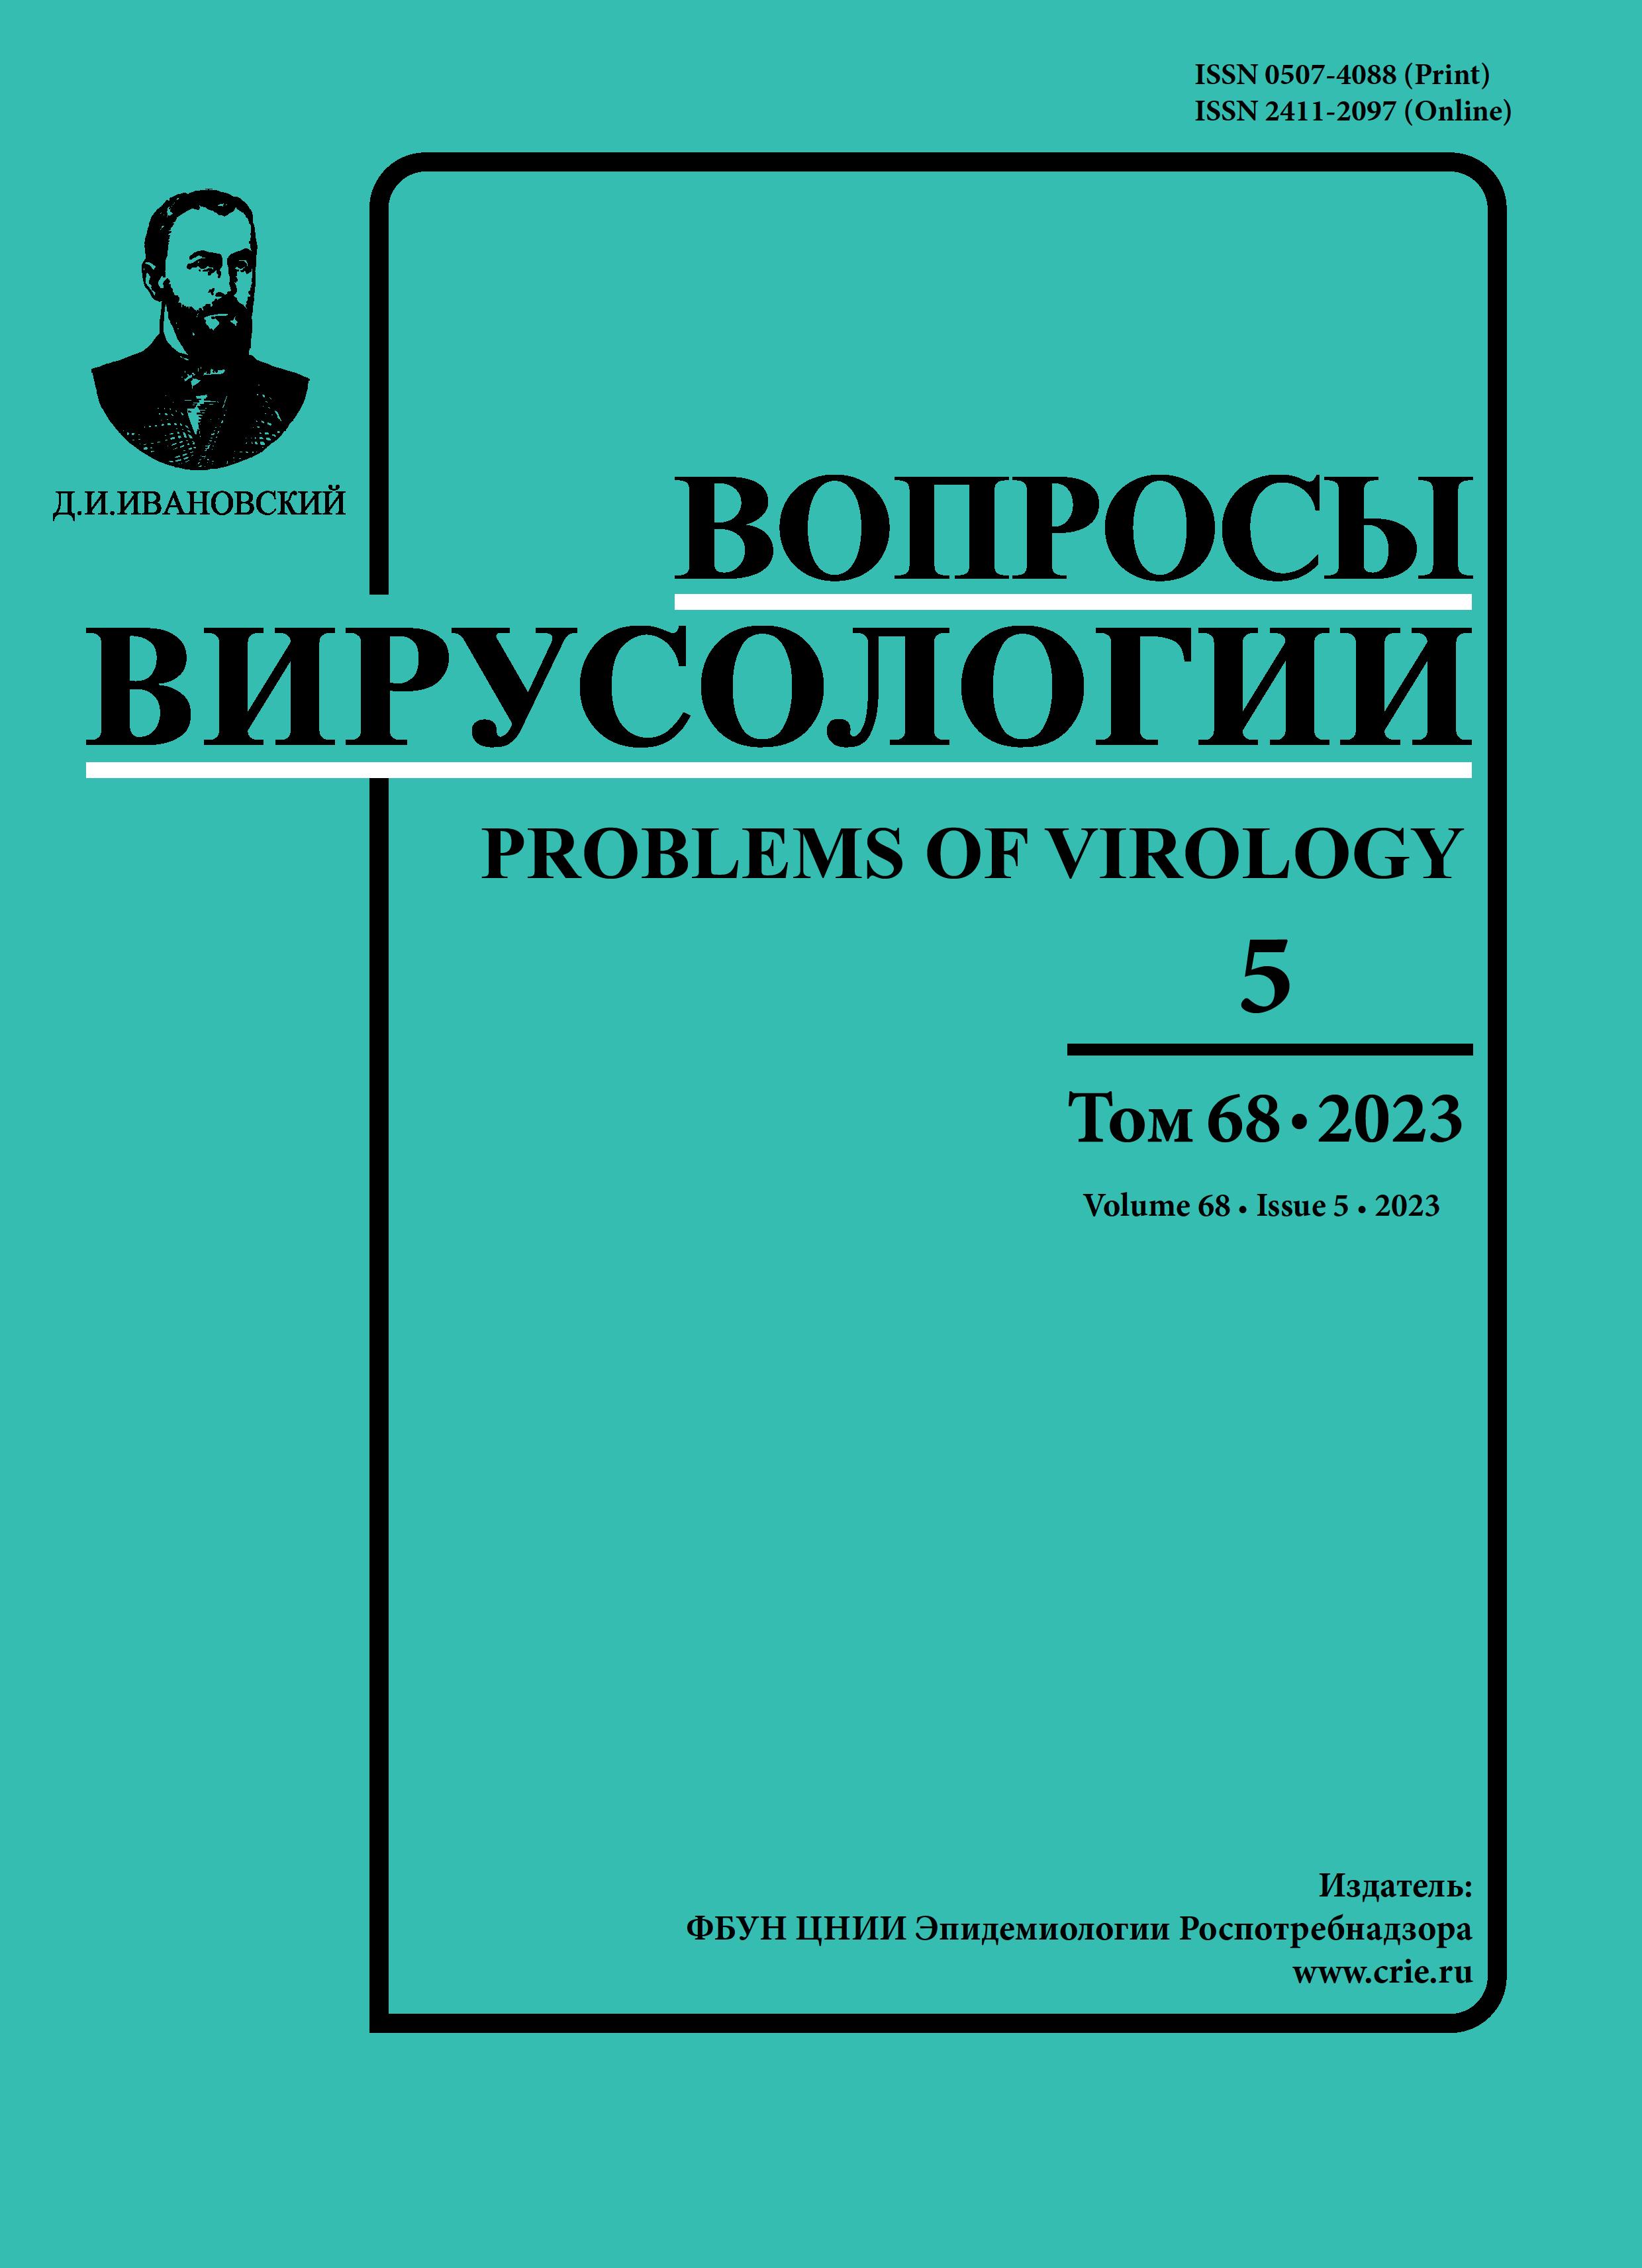 130th anniversary of virology - Lvov - Problems of Virology